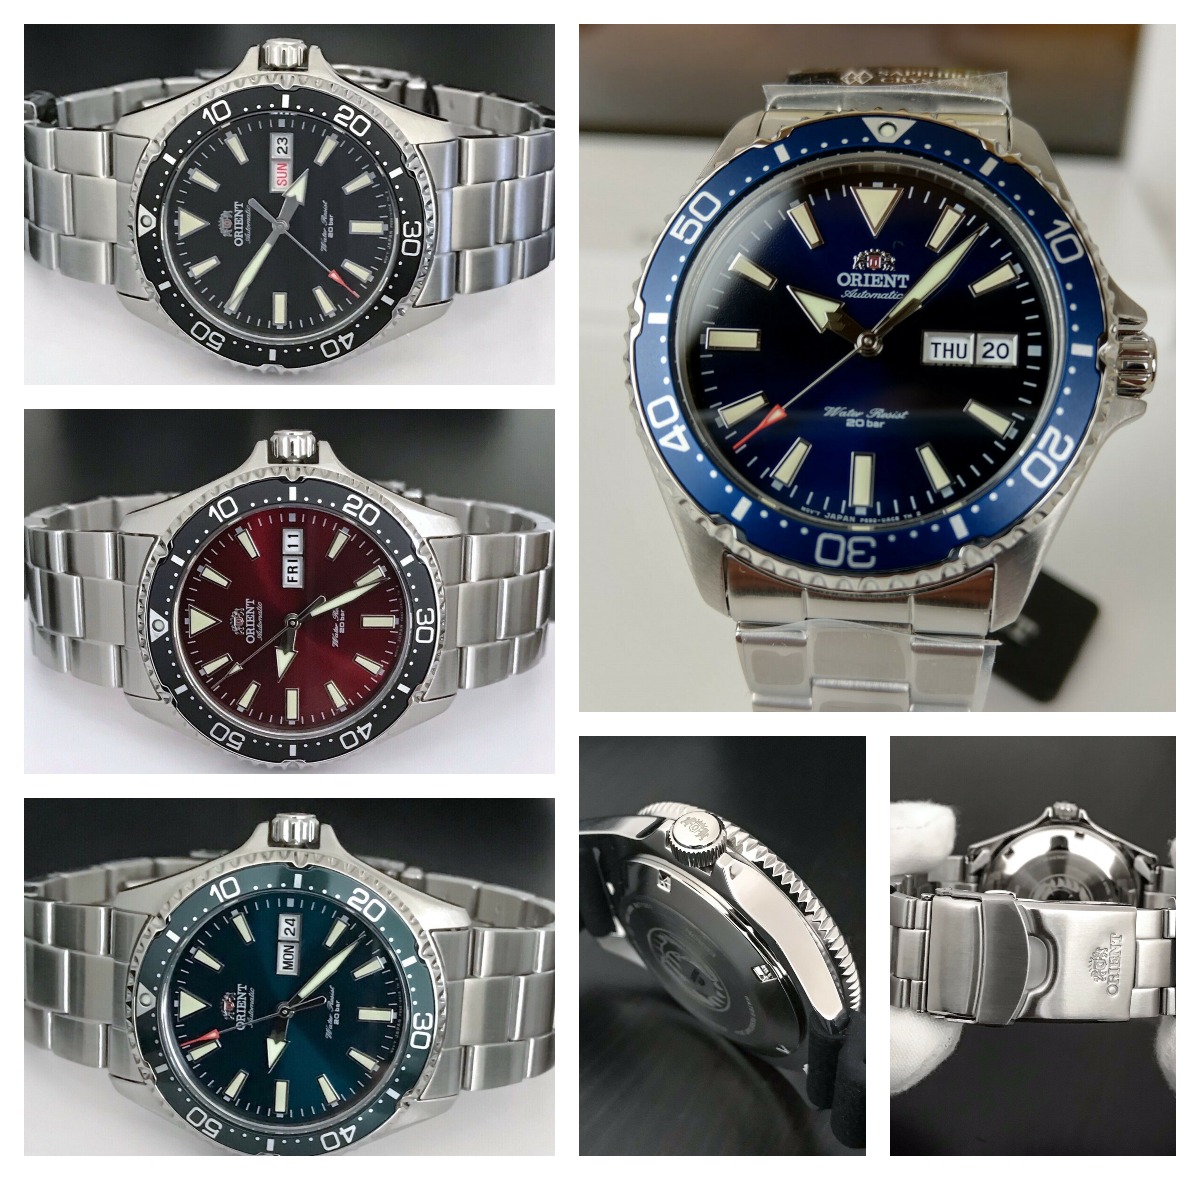 The Orient Mako III (Kamasu) can be considered as an affordable Rolex Submariner alternative. Picture credits: eBay seller willowswatches